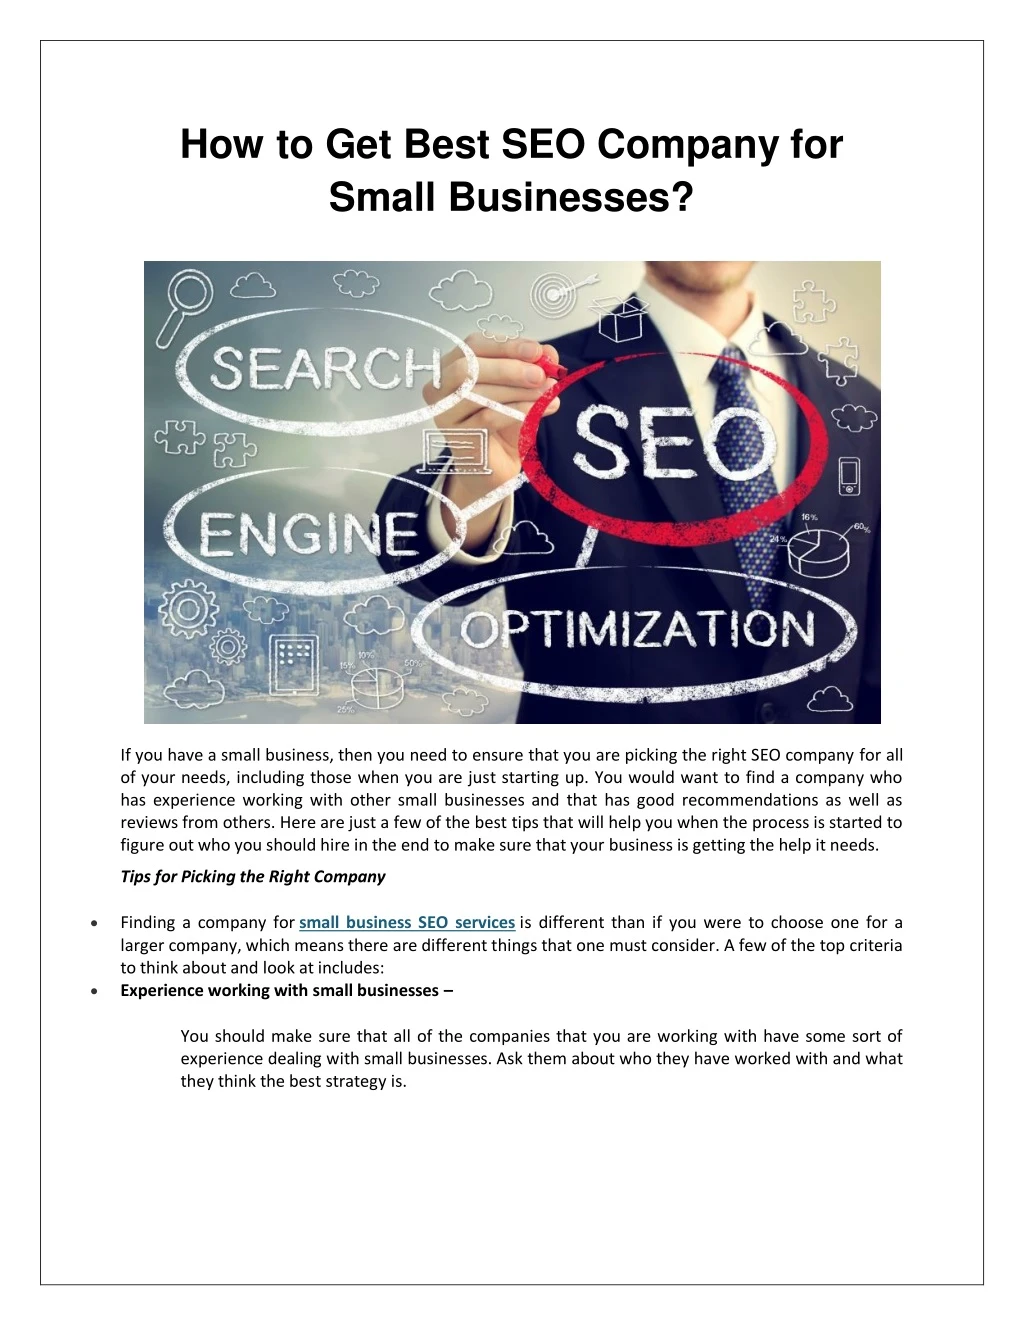 how to get best seo company for small businesses